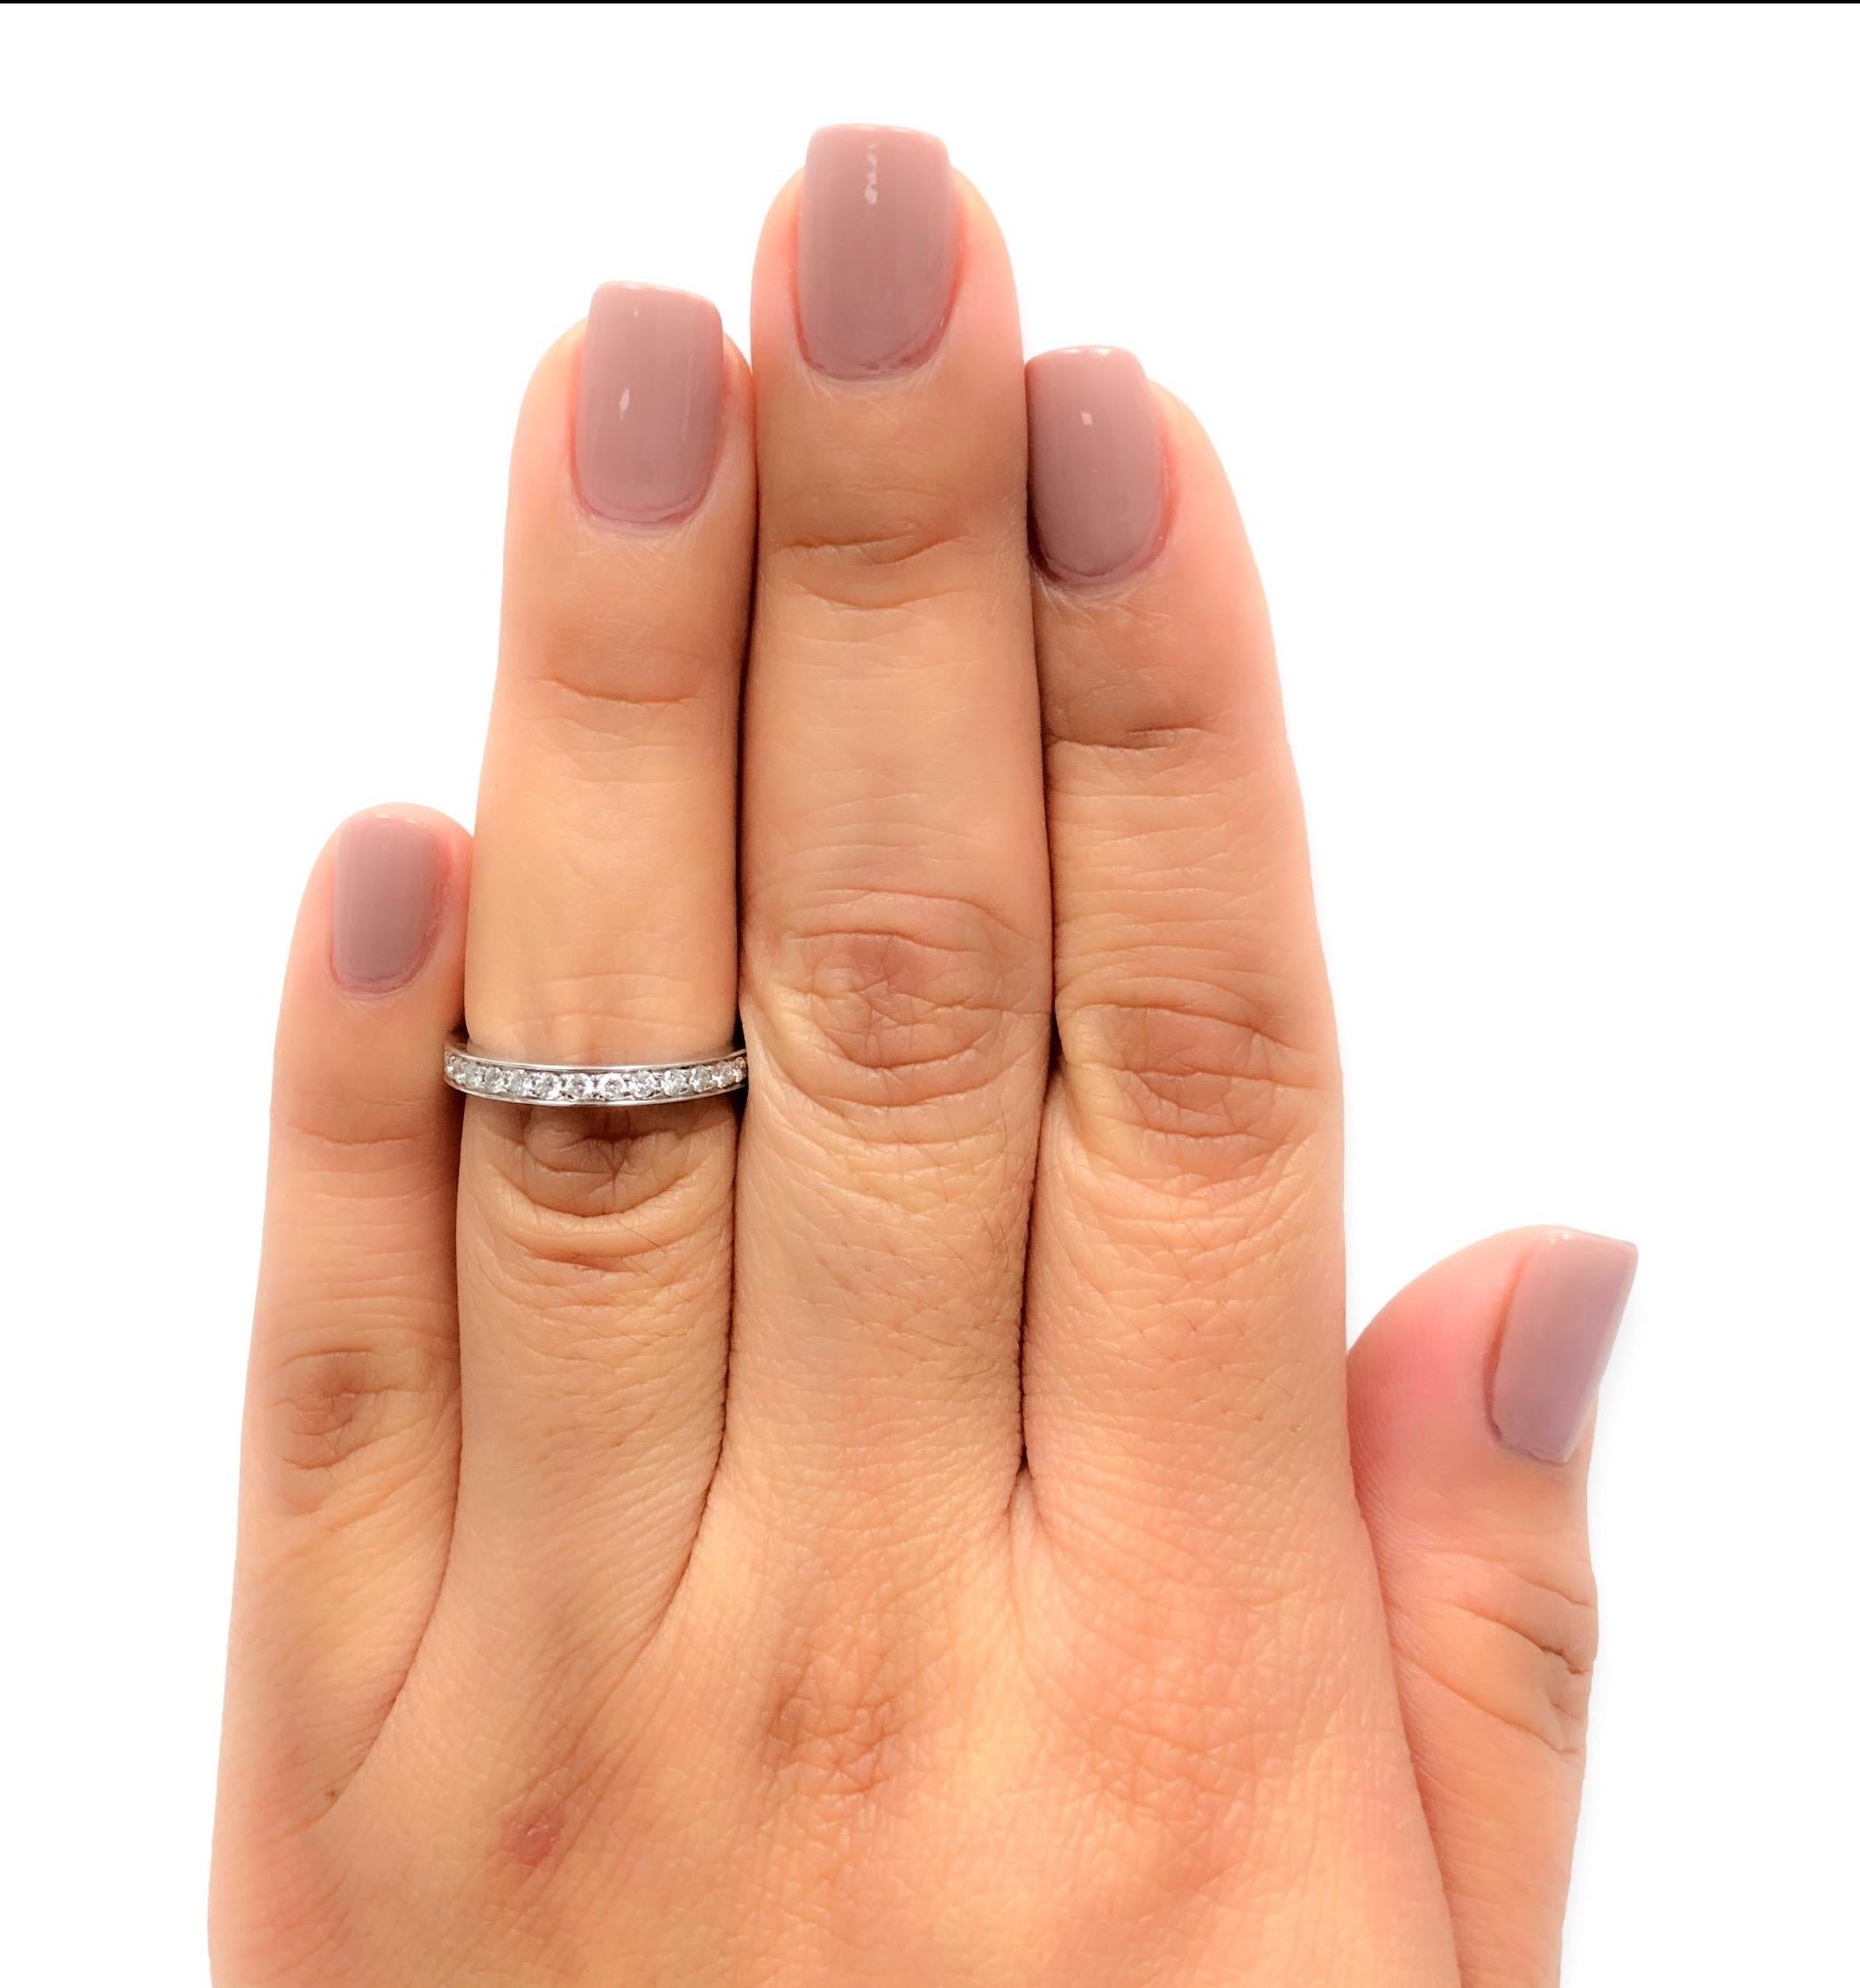 Modern Cartier Ballerine Platinum Channel Set Diamond Eternity Band Ring .40cts TW For Sale